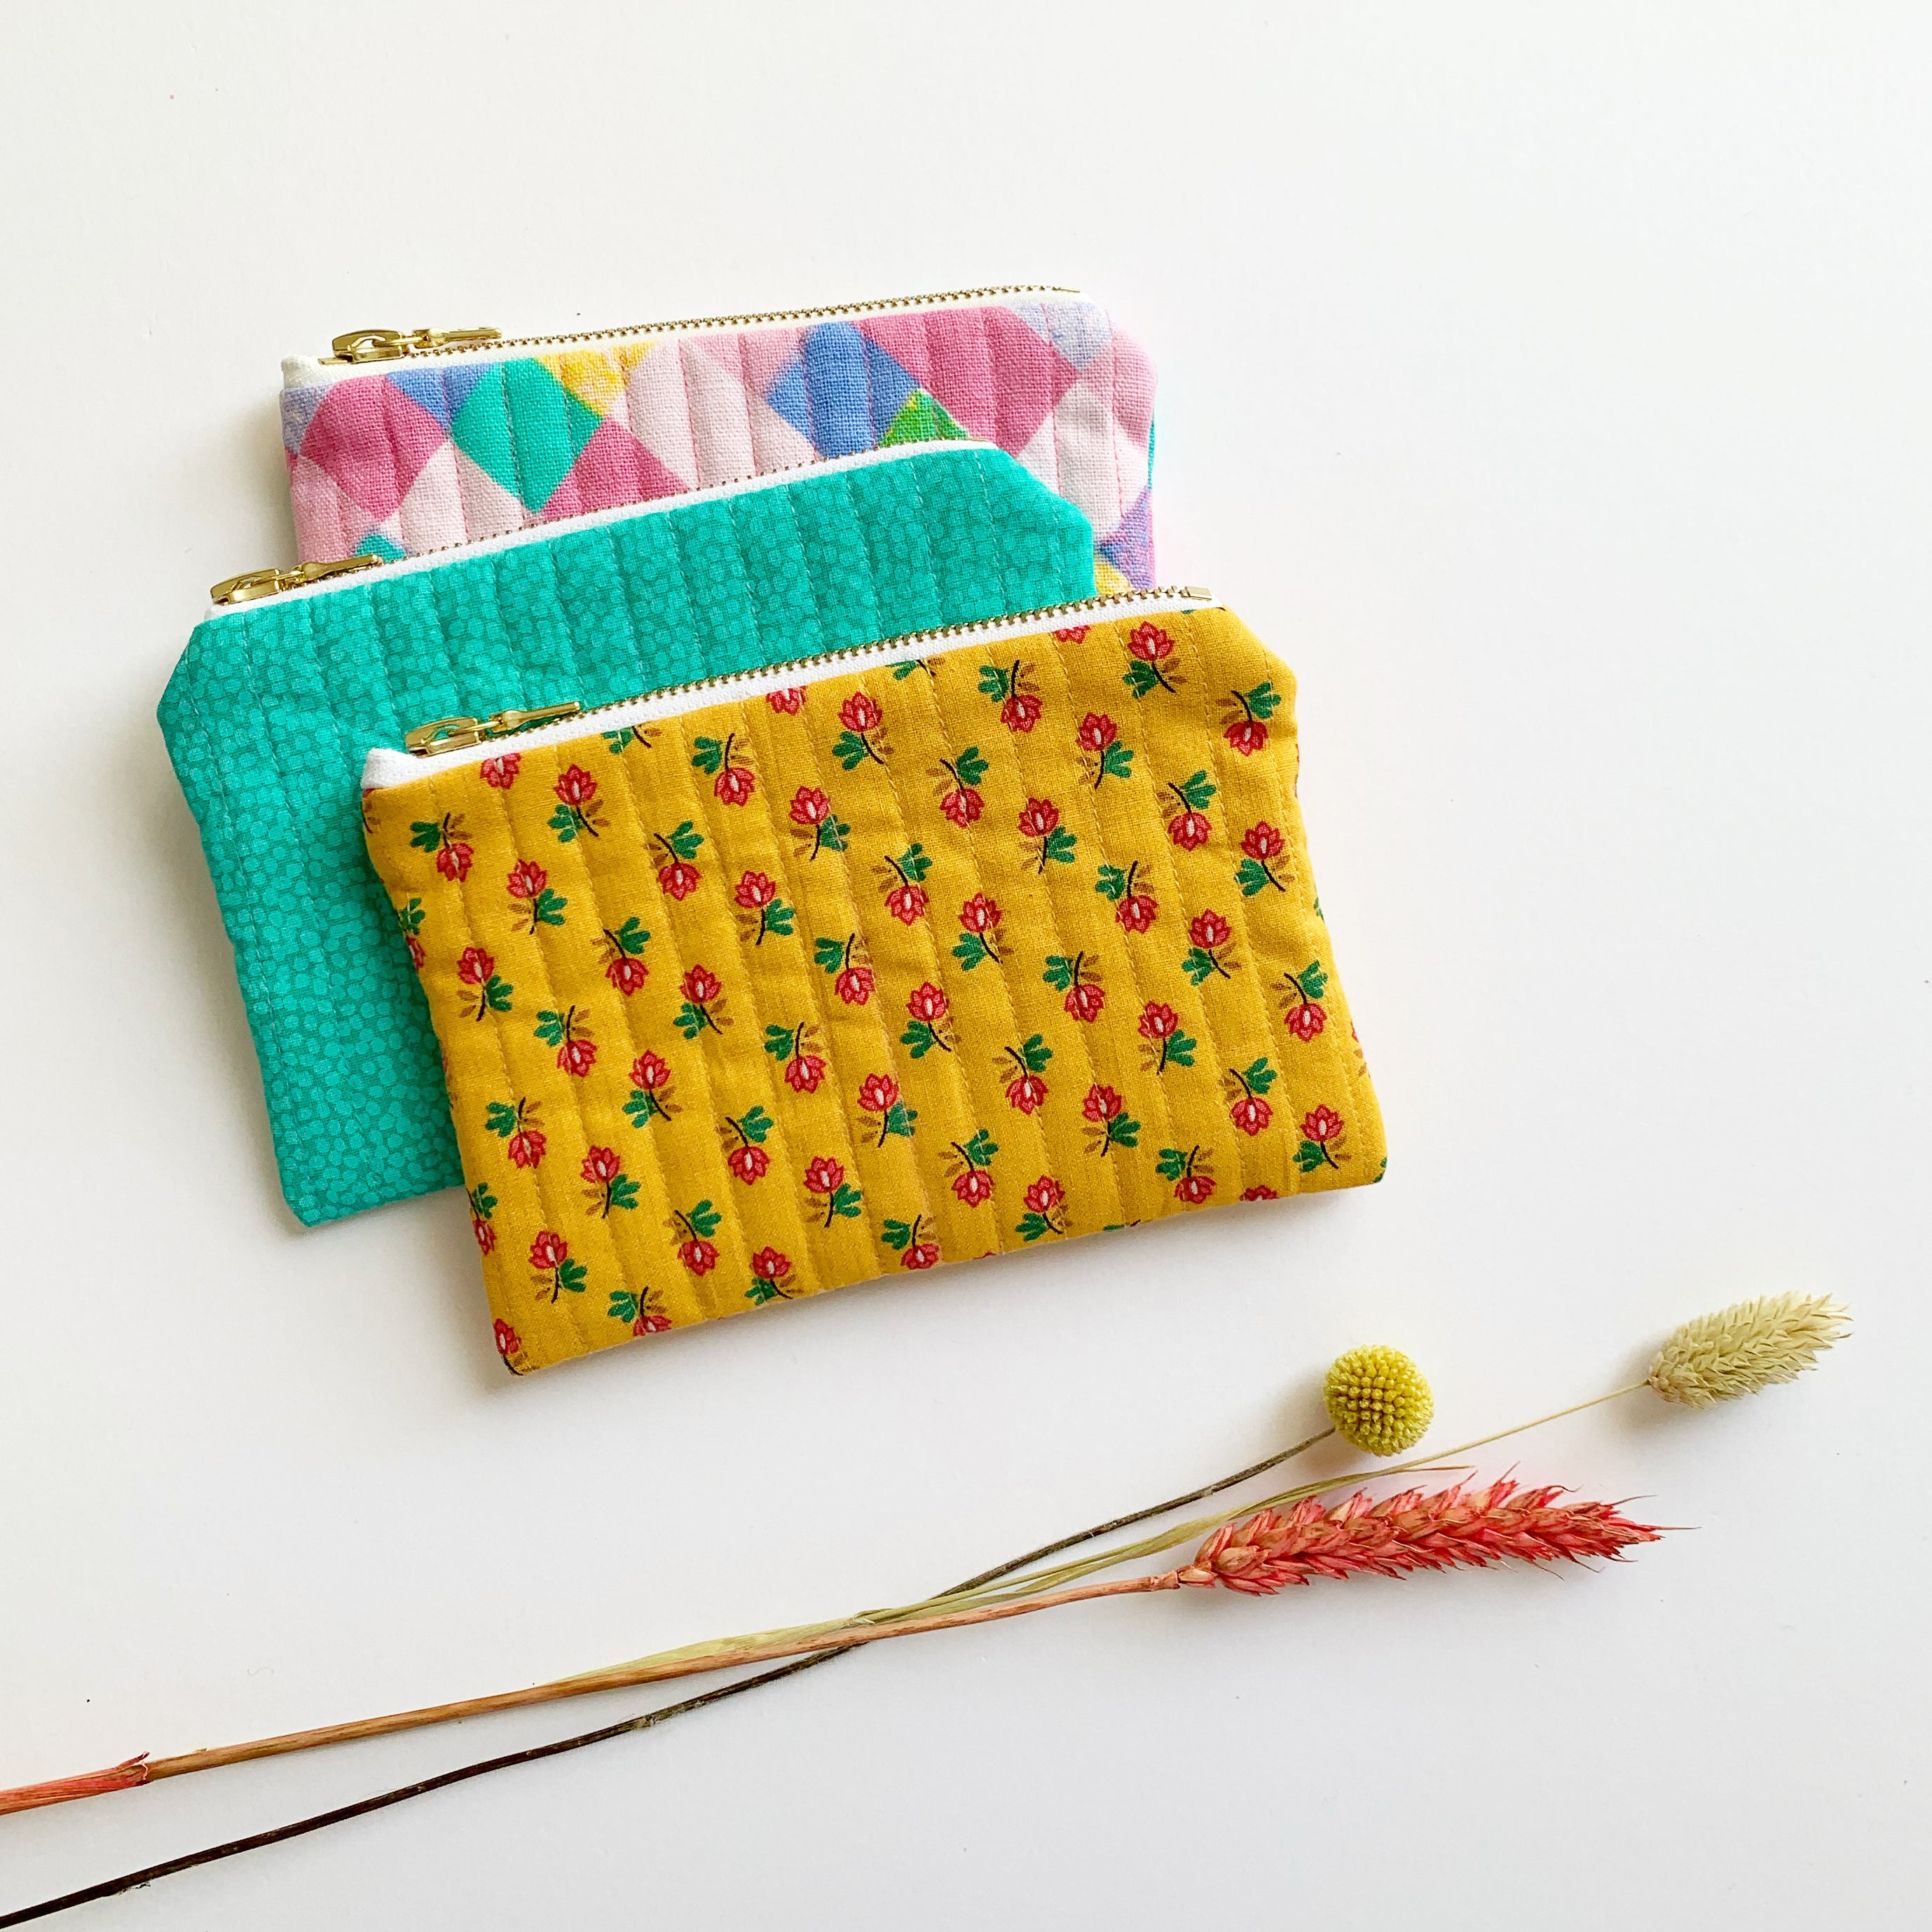 Quilted Coin Purse – Emerald green with minty dots